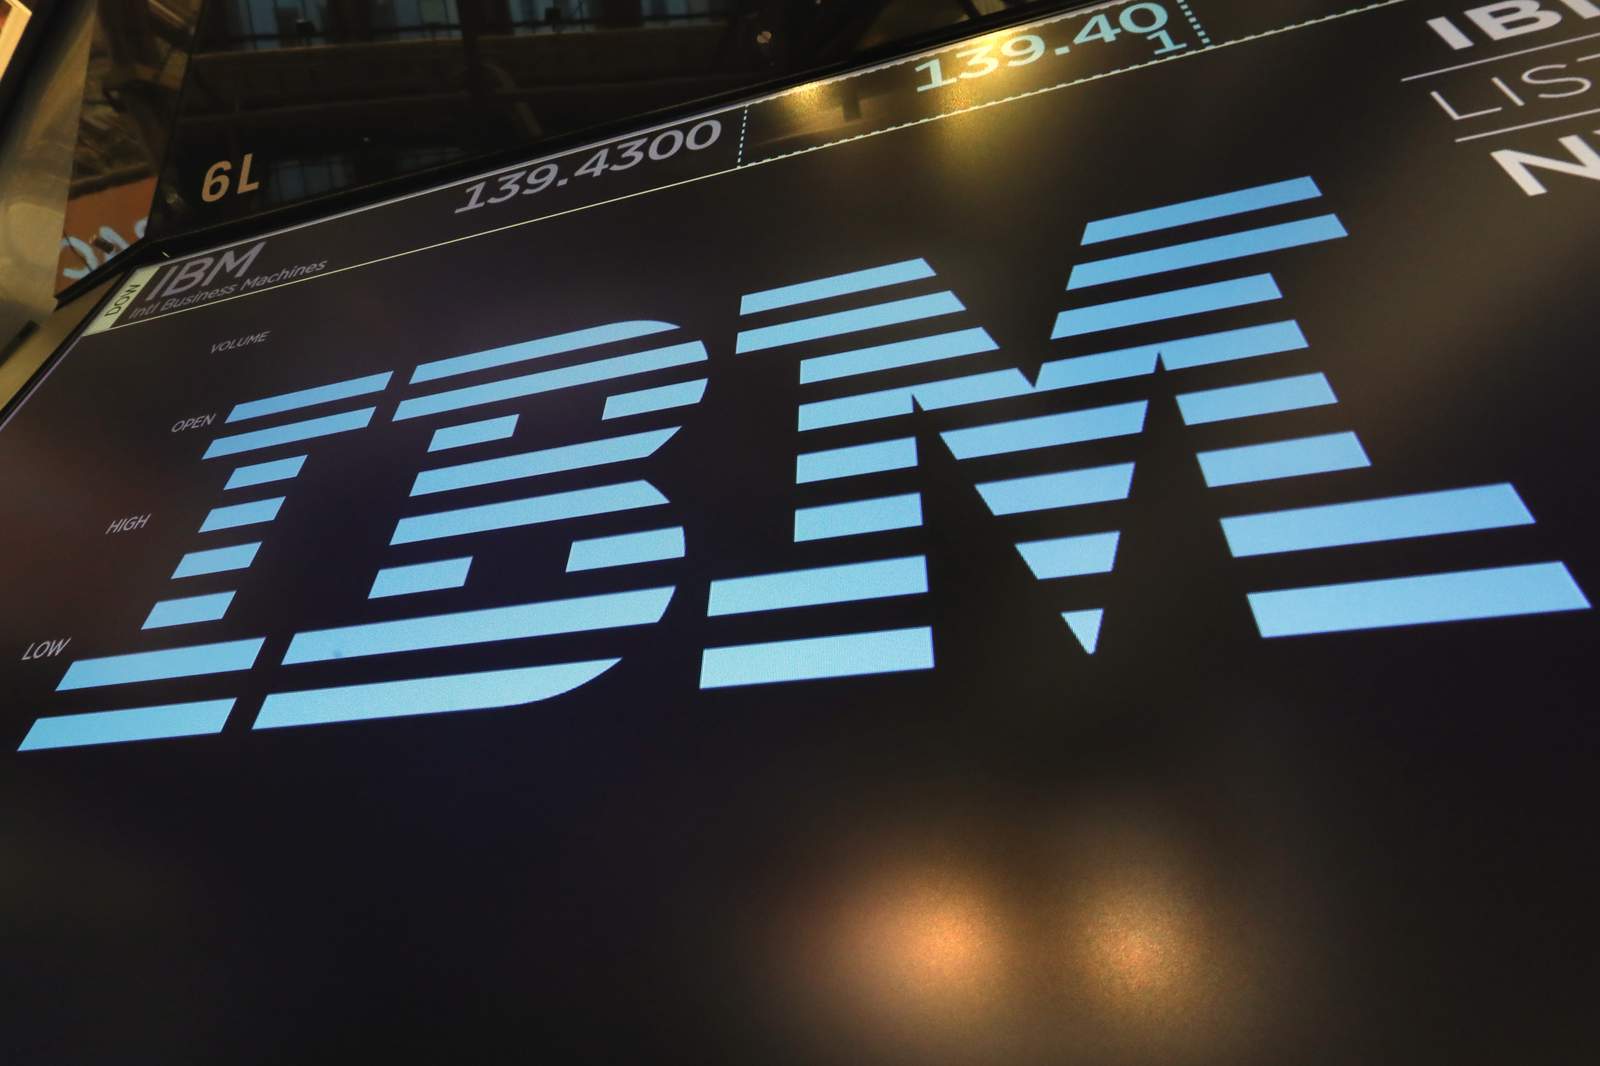 IBM to spin off $19B business to focus on cloud computing